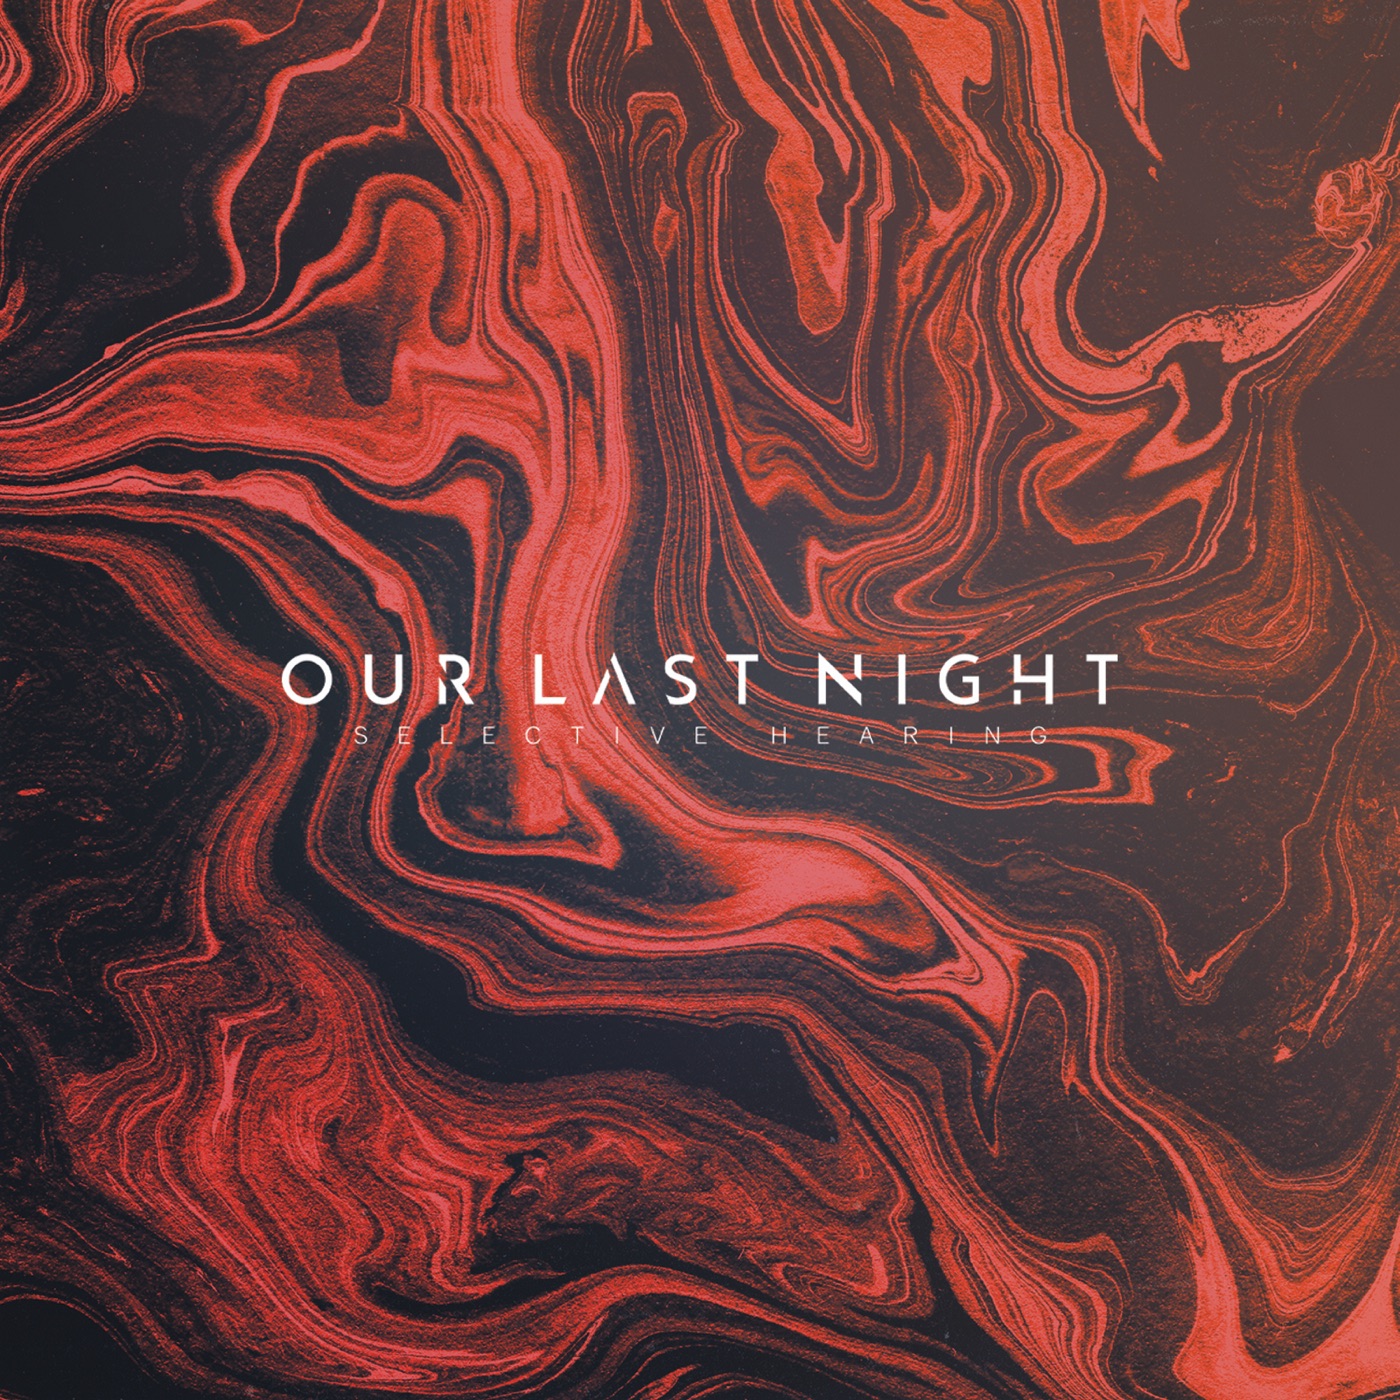 Our Last Night - Selective Hearing (2017)